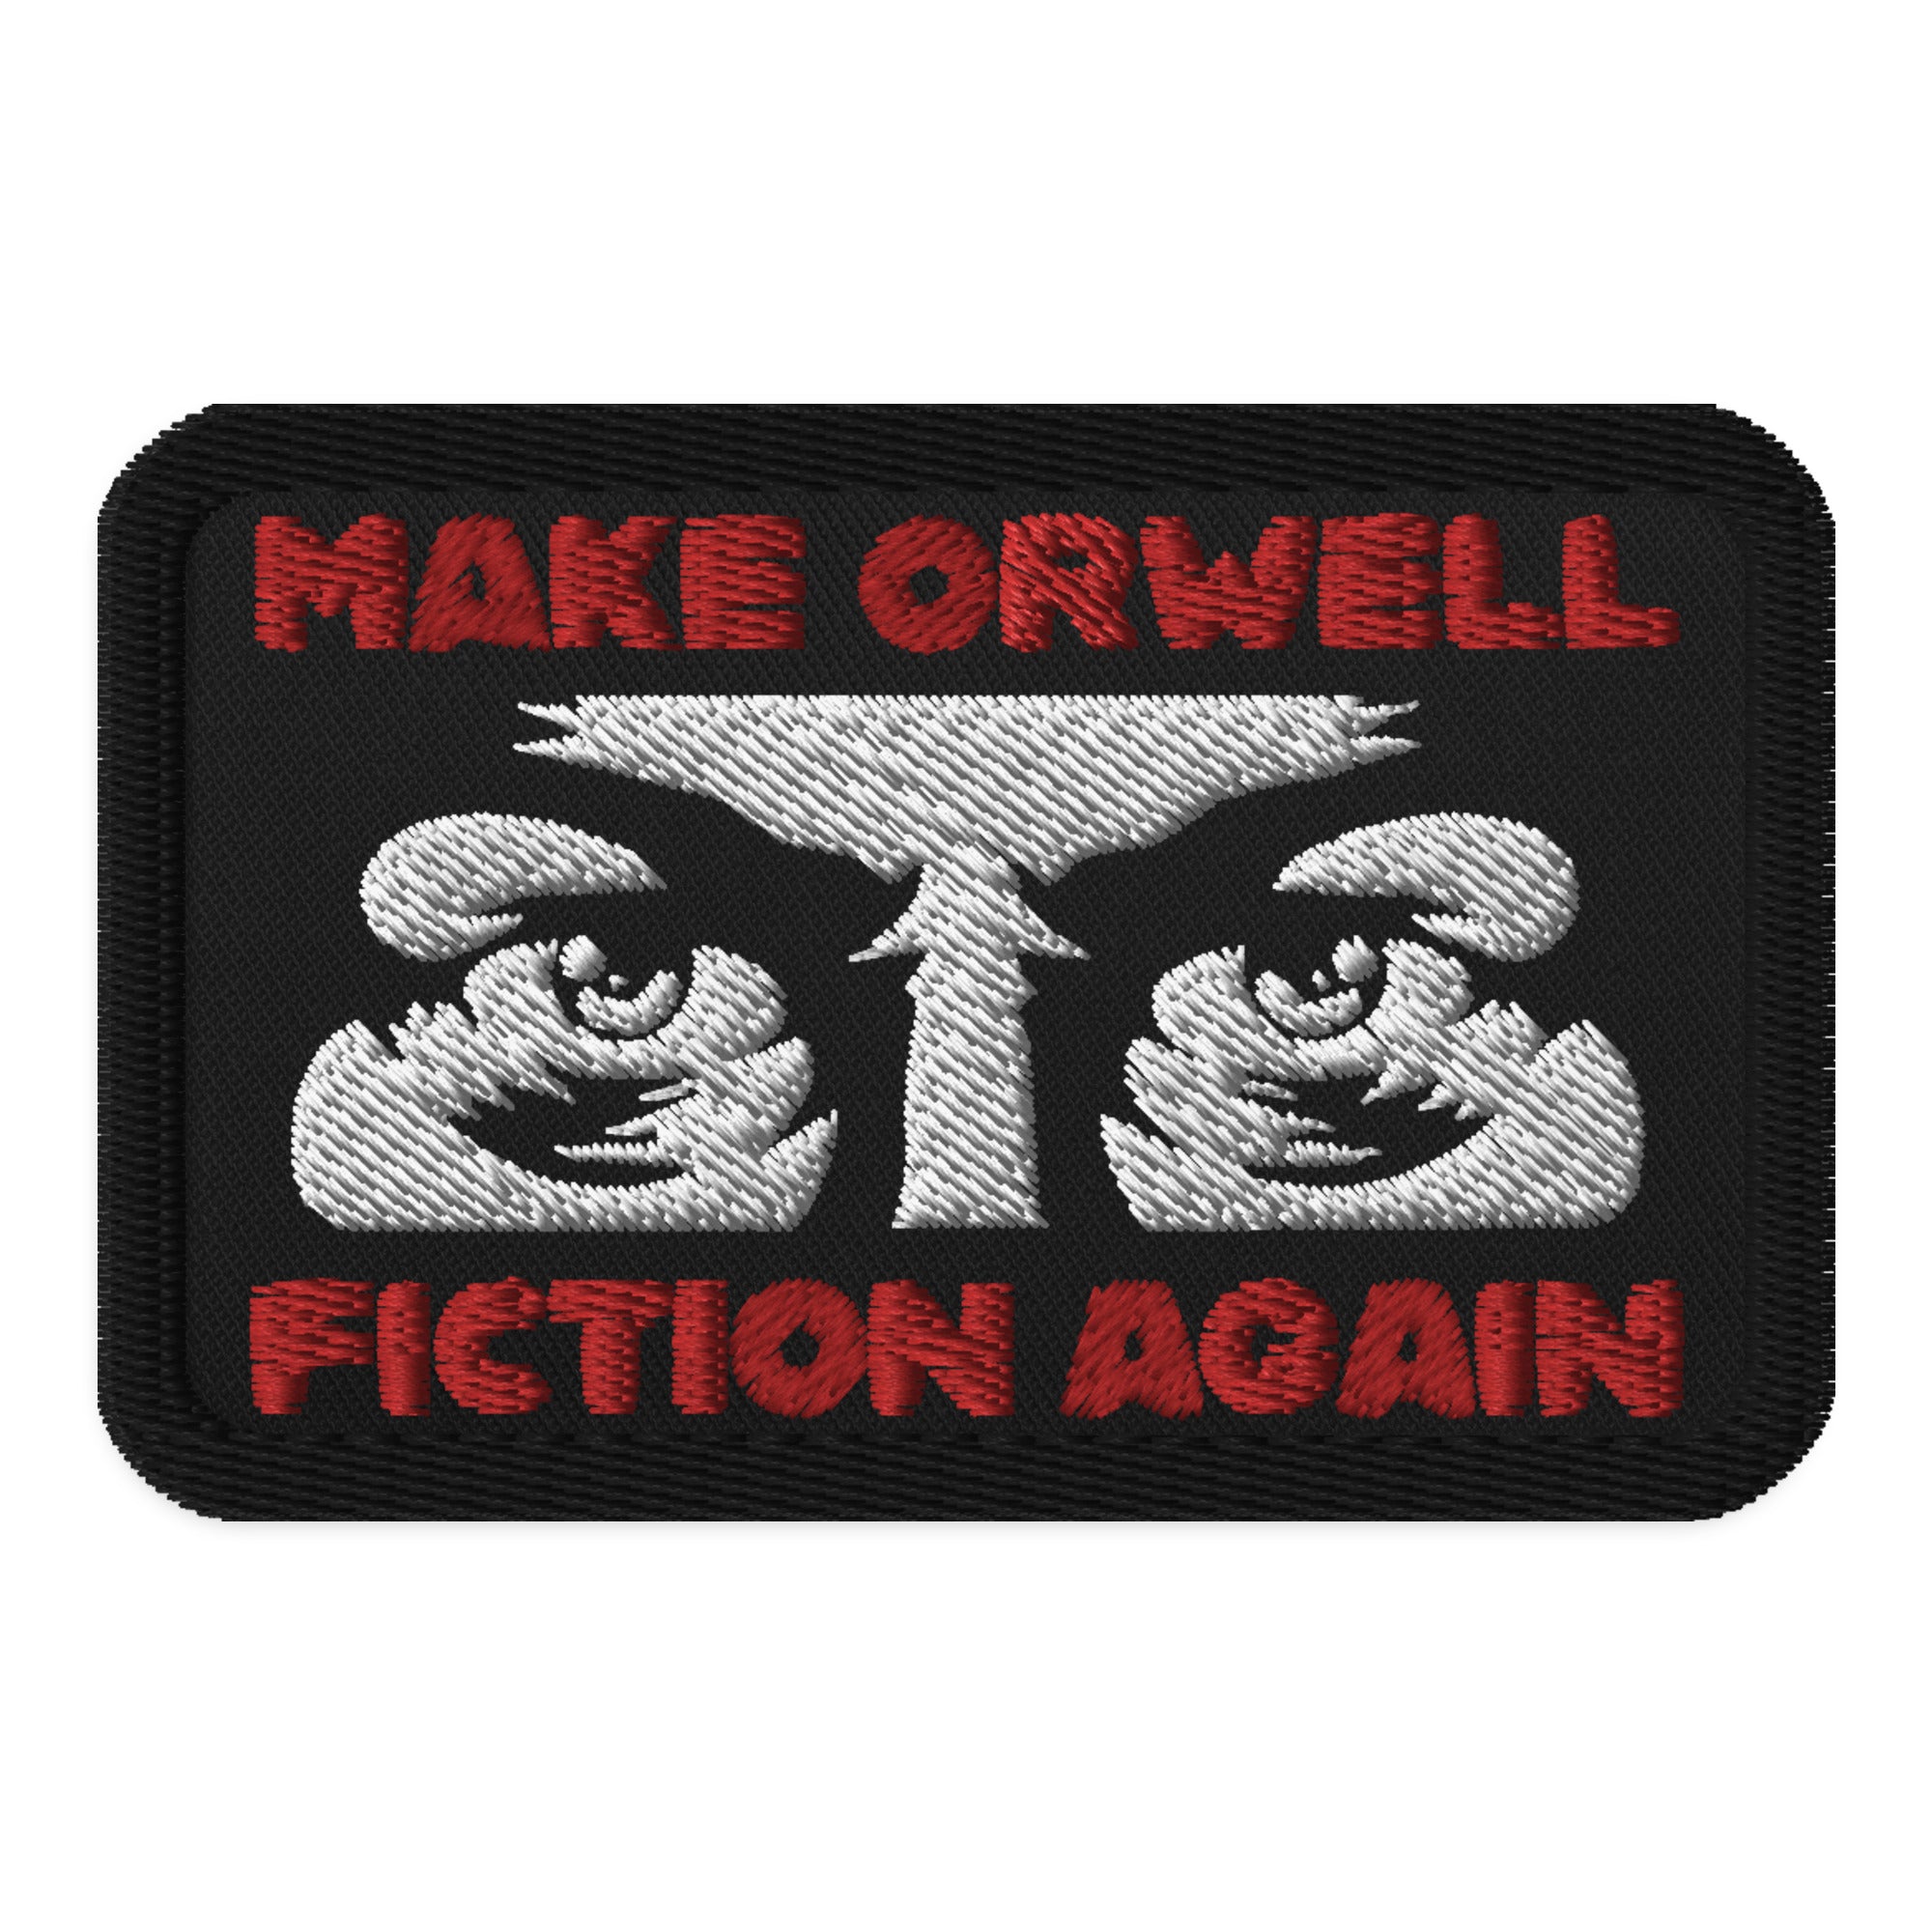 Make Orwell Fiction Again Embroidered Patch